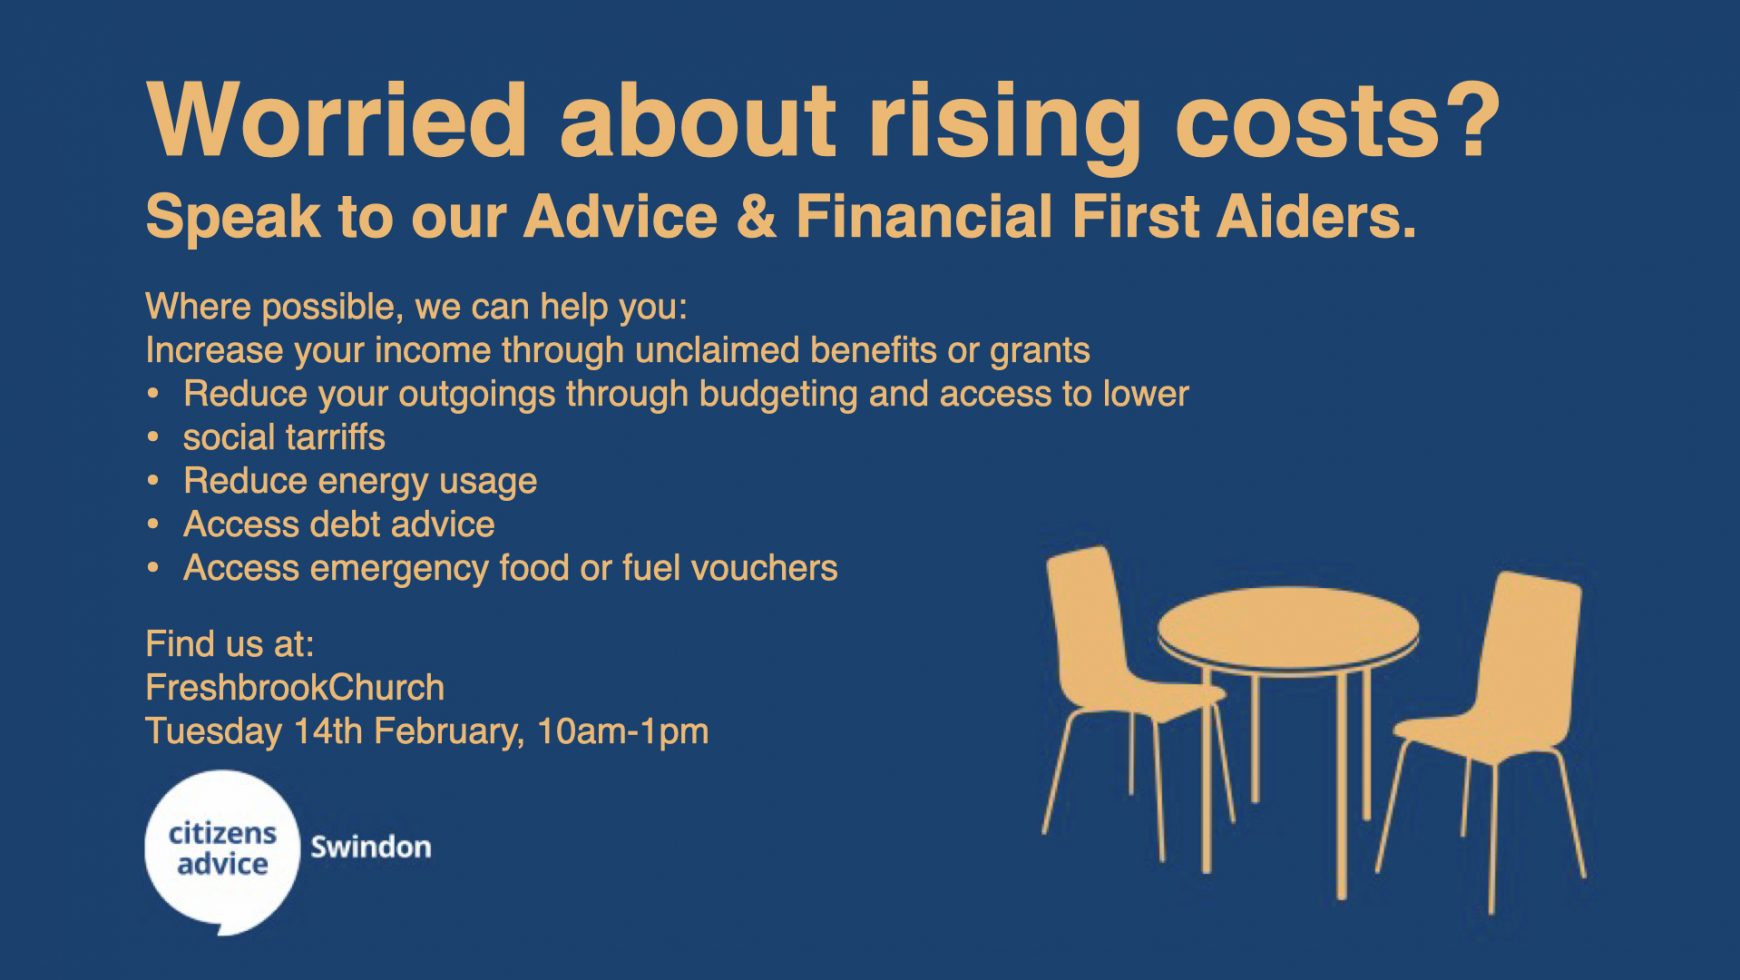 HERE TODAY: Citizens Advice session